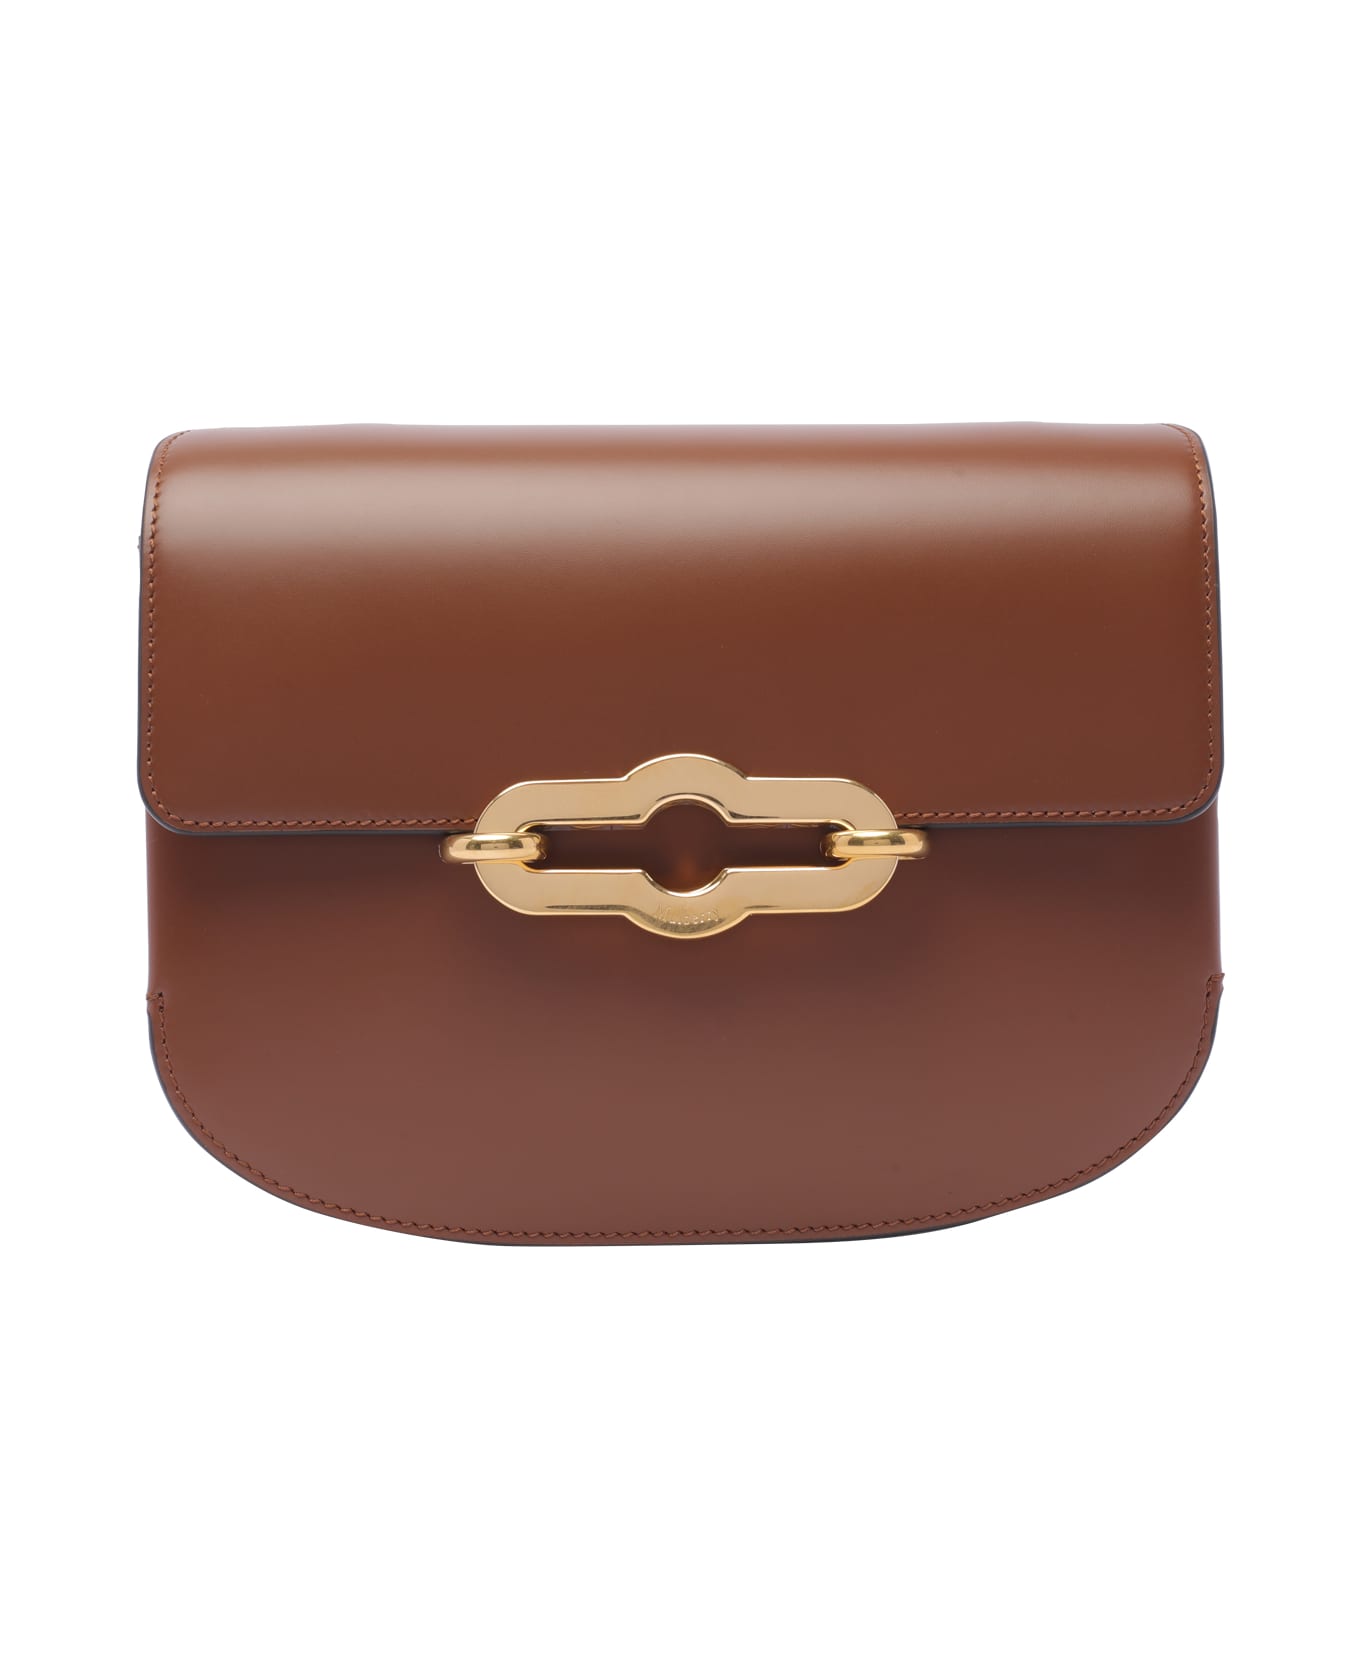 Mulberry Pimlico Crossbody Bag - Brown トートバッグ